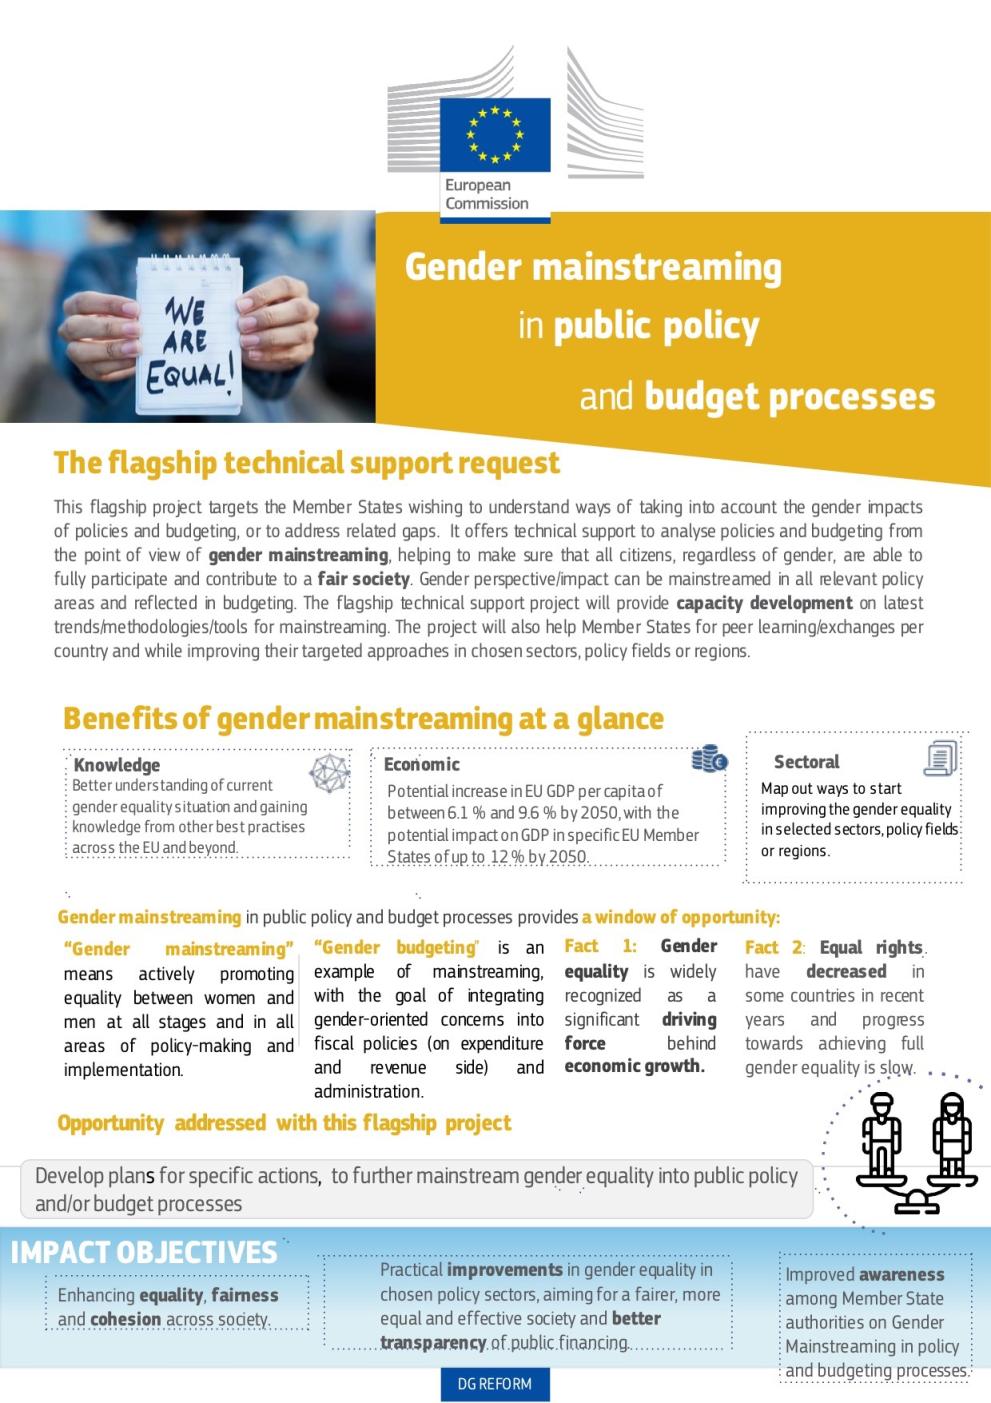 Gender mainstreaming in public policy and budget processes